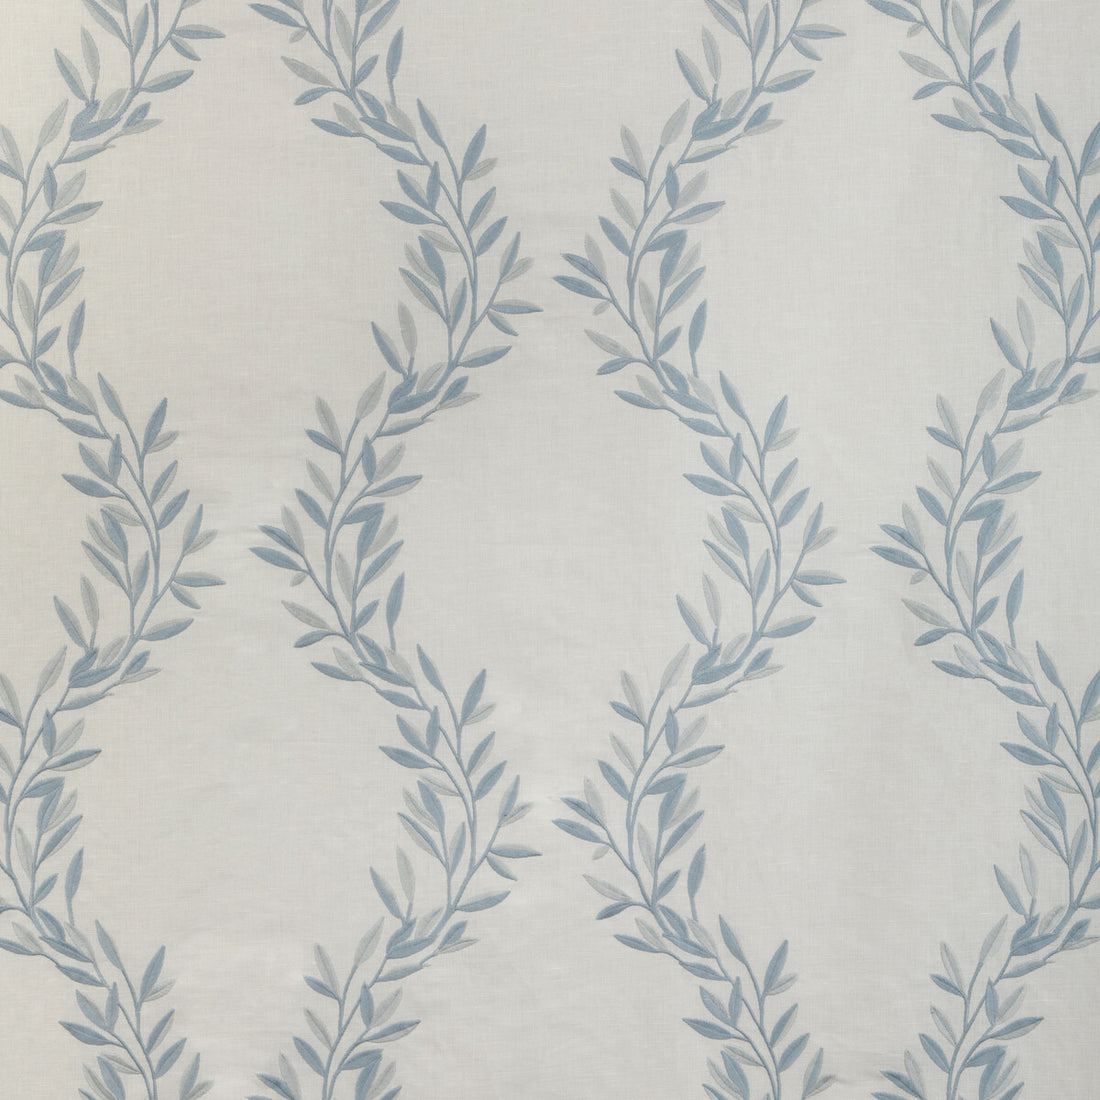 Leaf Frame fabric in spa color - pattern 36942.15.0 - by Kravet Design in the Alexa Hampton collection